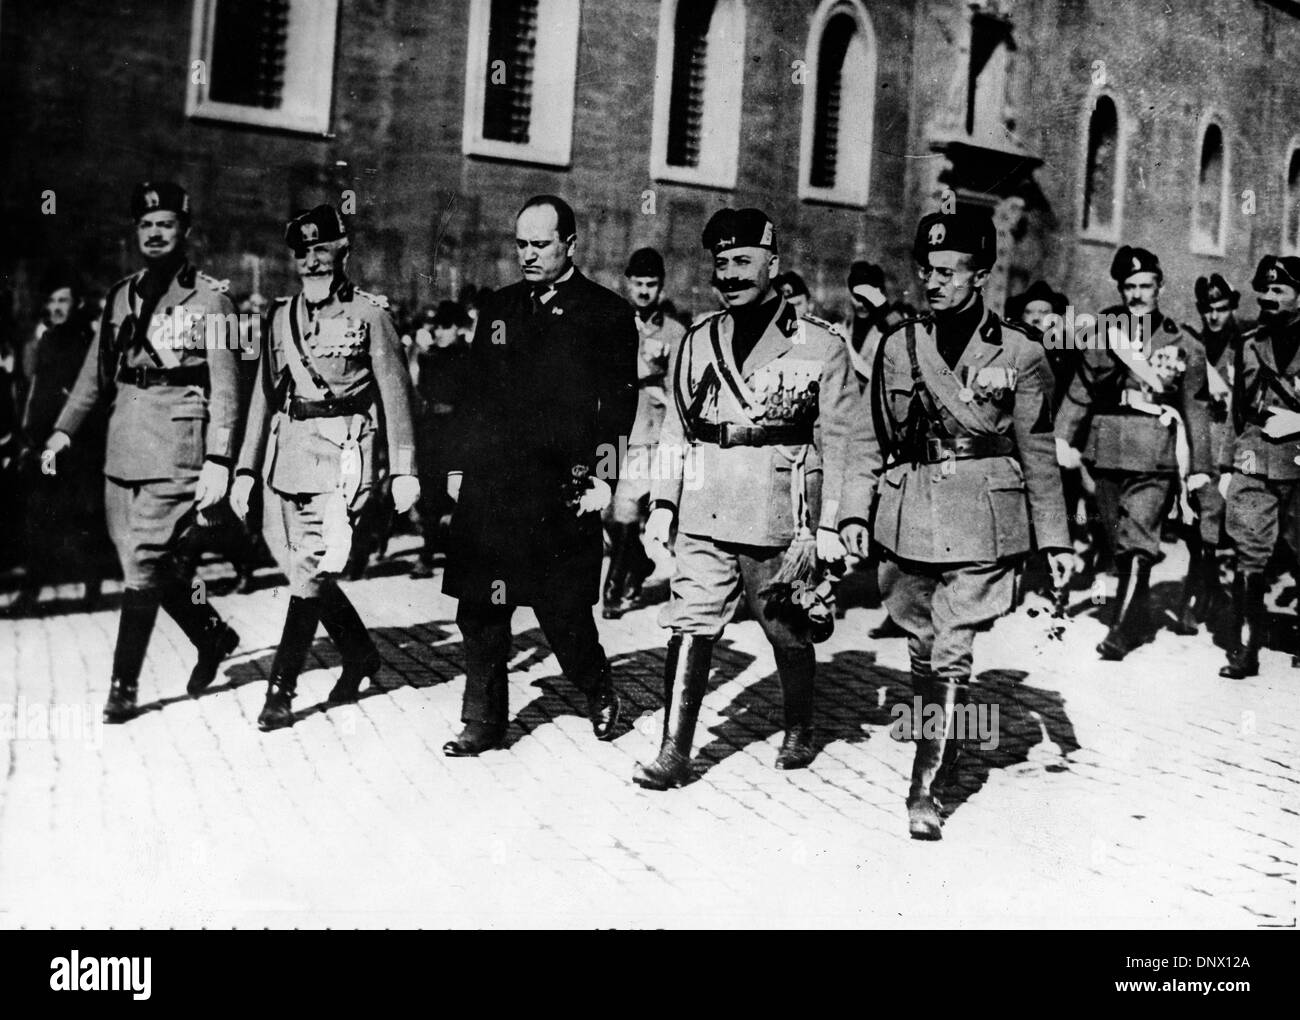 Oct. 6, 1922 - Rome, Italy - BENITO MUSSOLINI (1883-1945) the Italian dictator and leader of the Fascist movement with his generals and Fascist troops as they march on Rome. (Credit Image: © KEYSTONE Pictures/ZUMAPRESS.com) Stock Photo